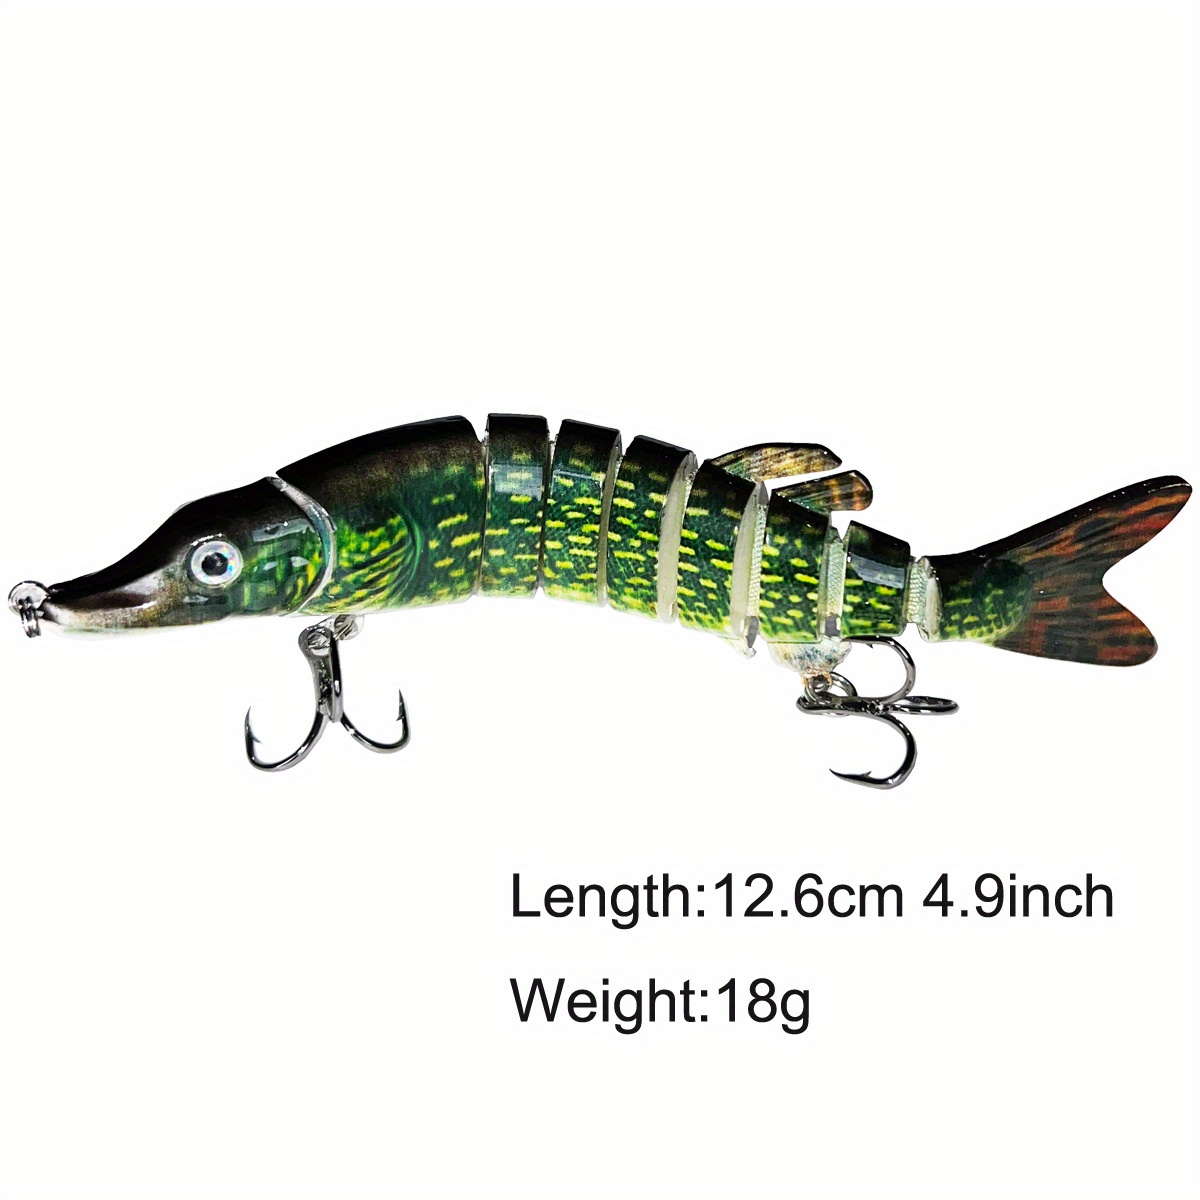  TRUSCEND Fishing Lures for Bass Trout Segmented Multi